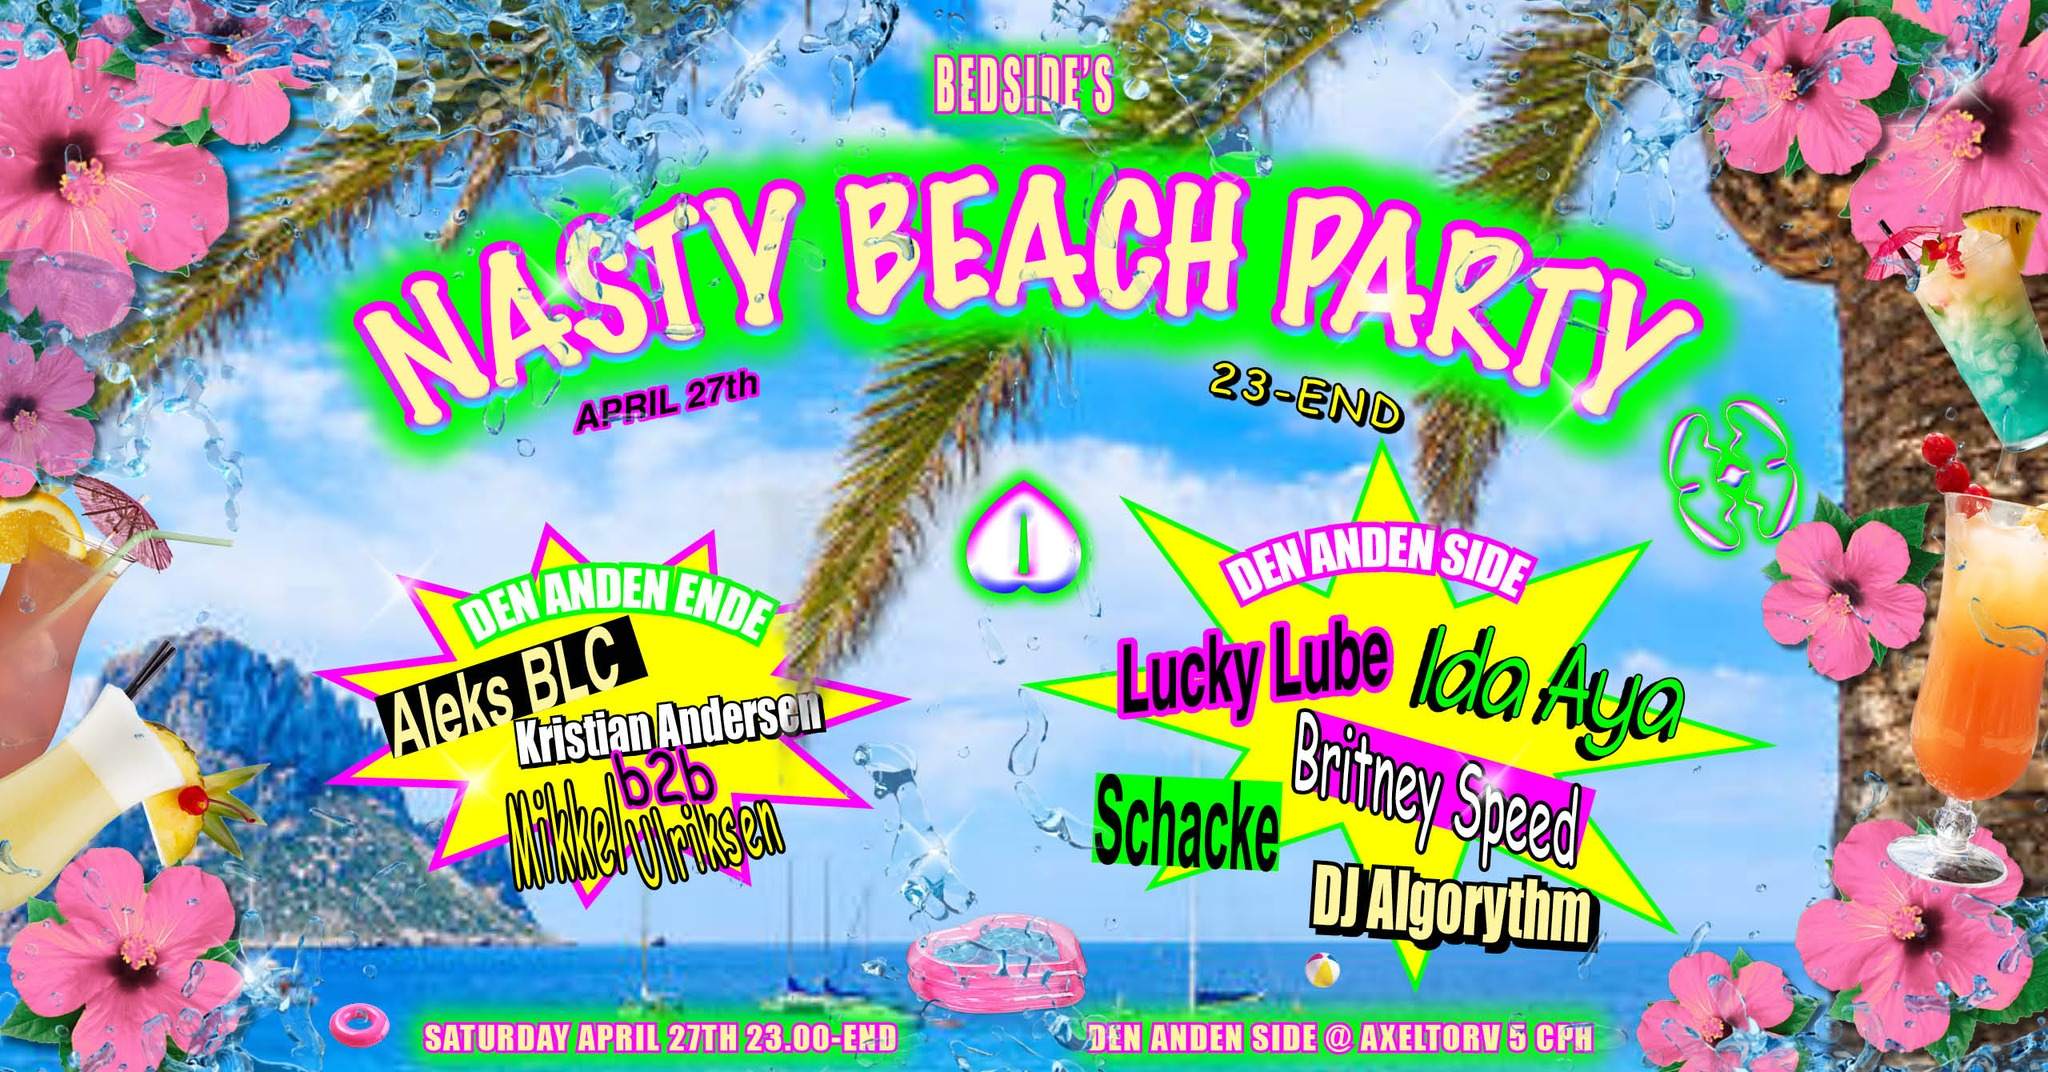 BEDSIDE's NASTY BEACH PARTY - フライヤー表